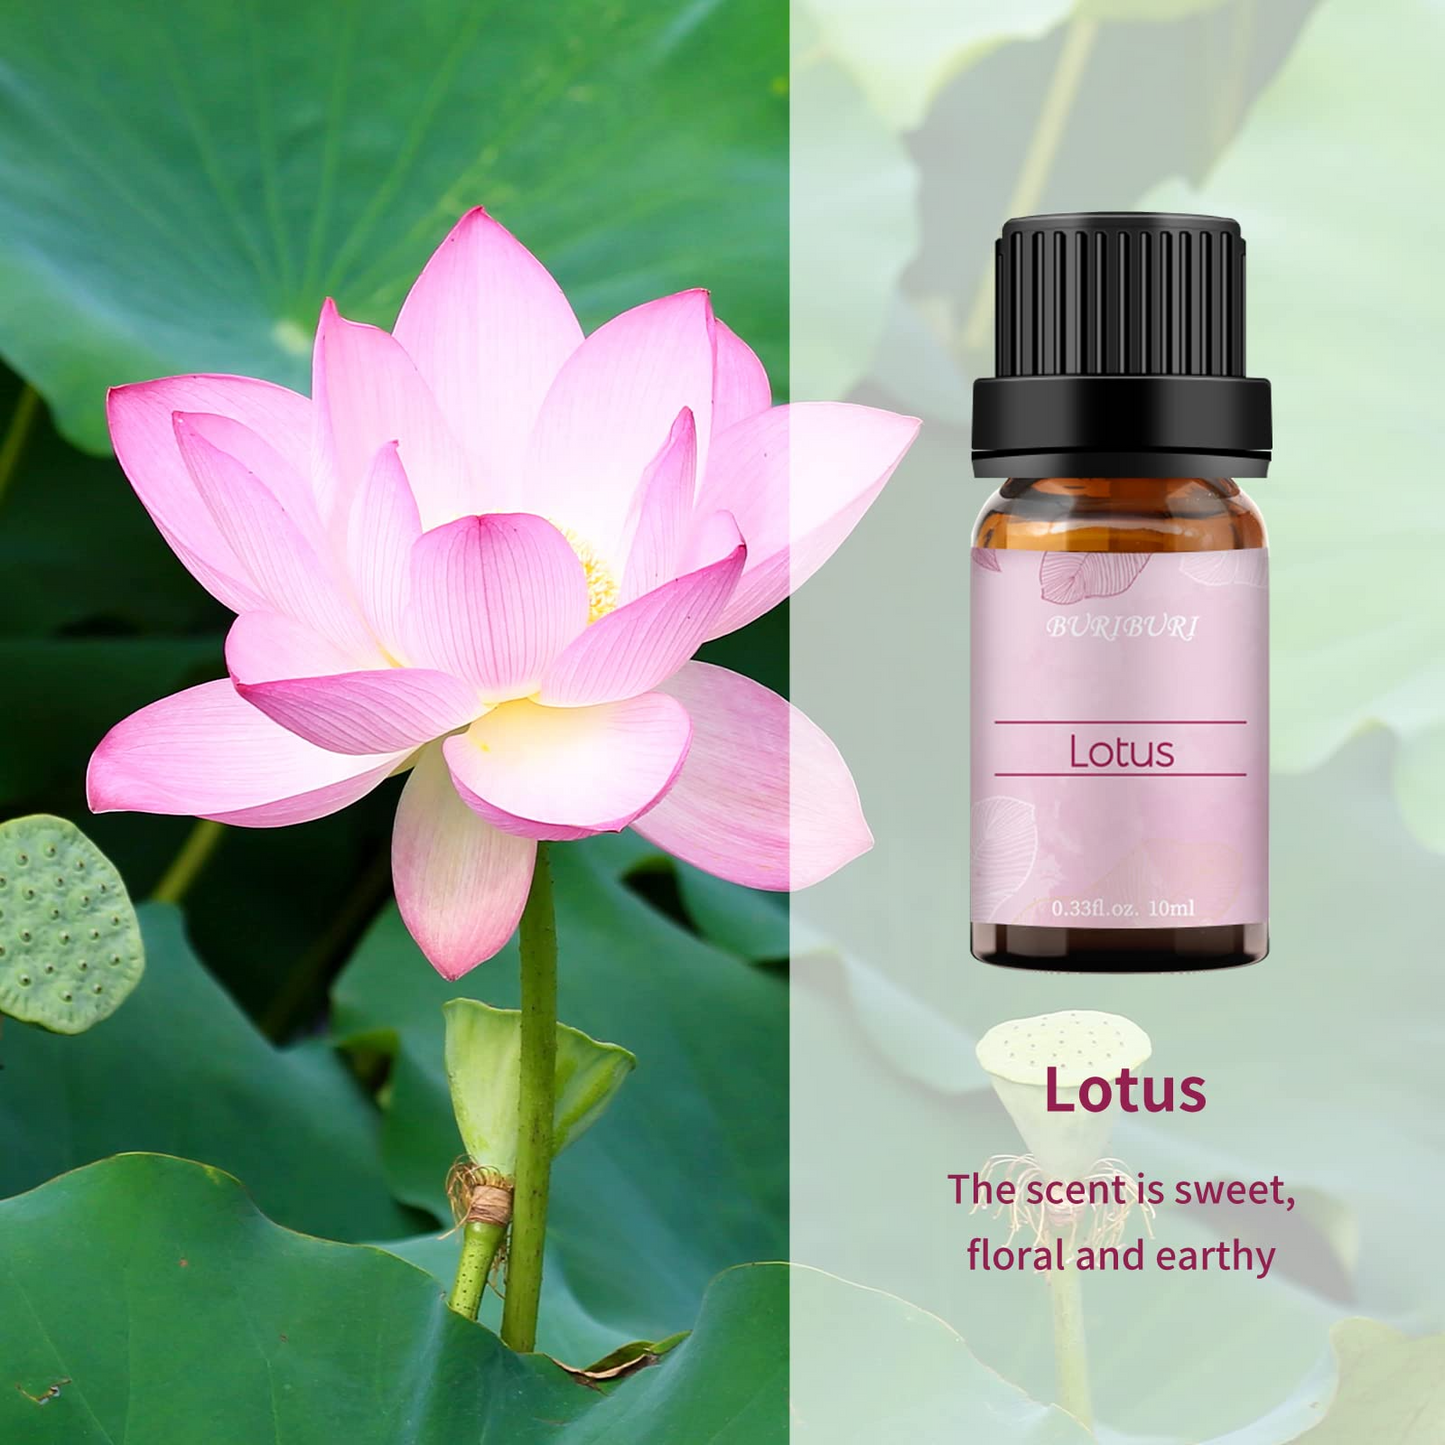 Lotus and Peony Essential Oil Set 2 Pack